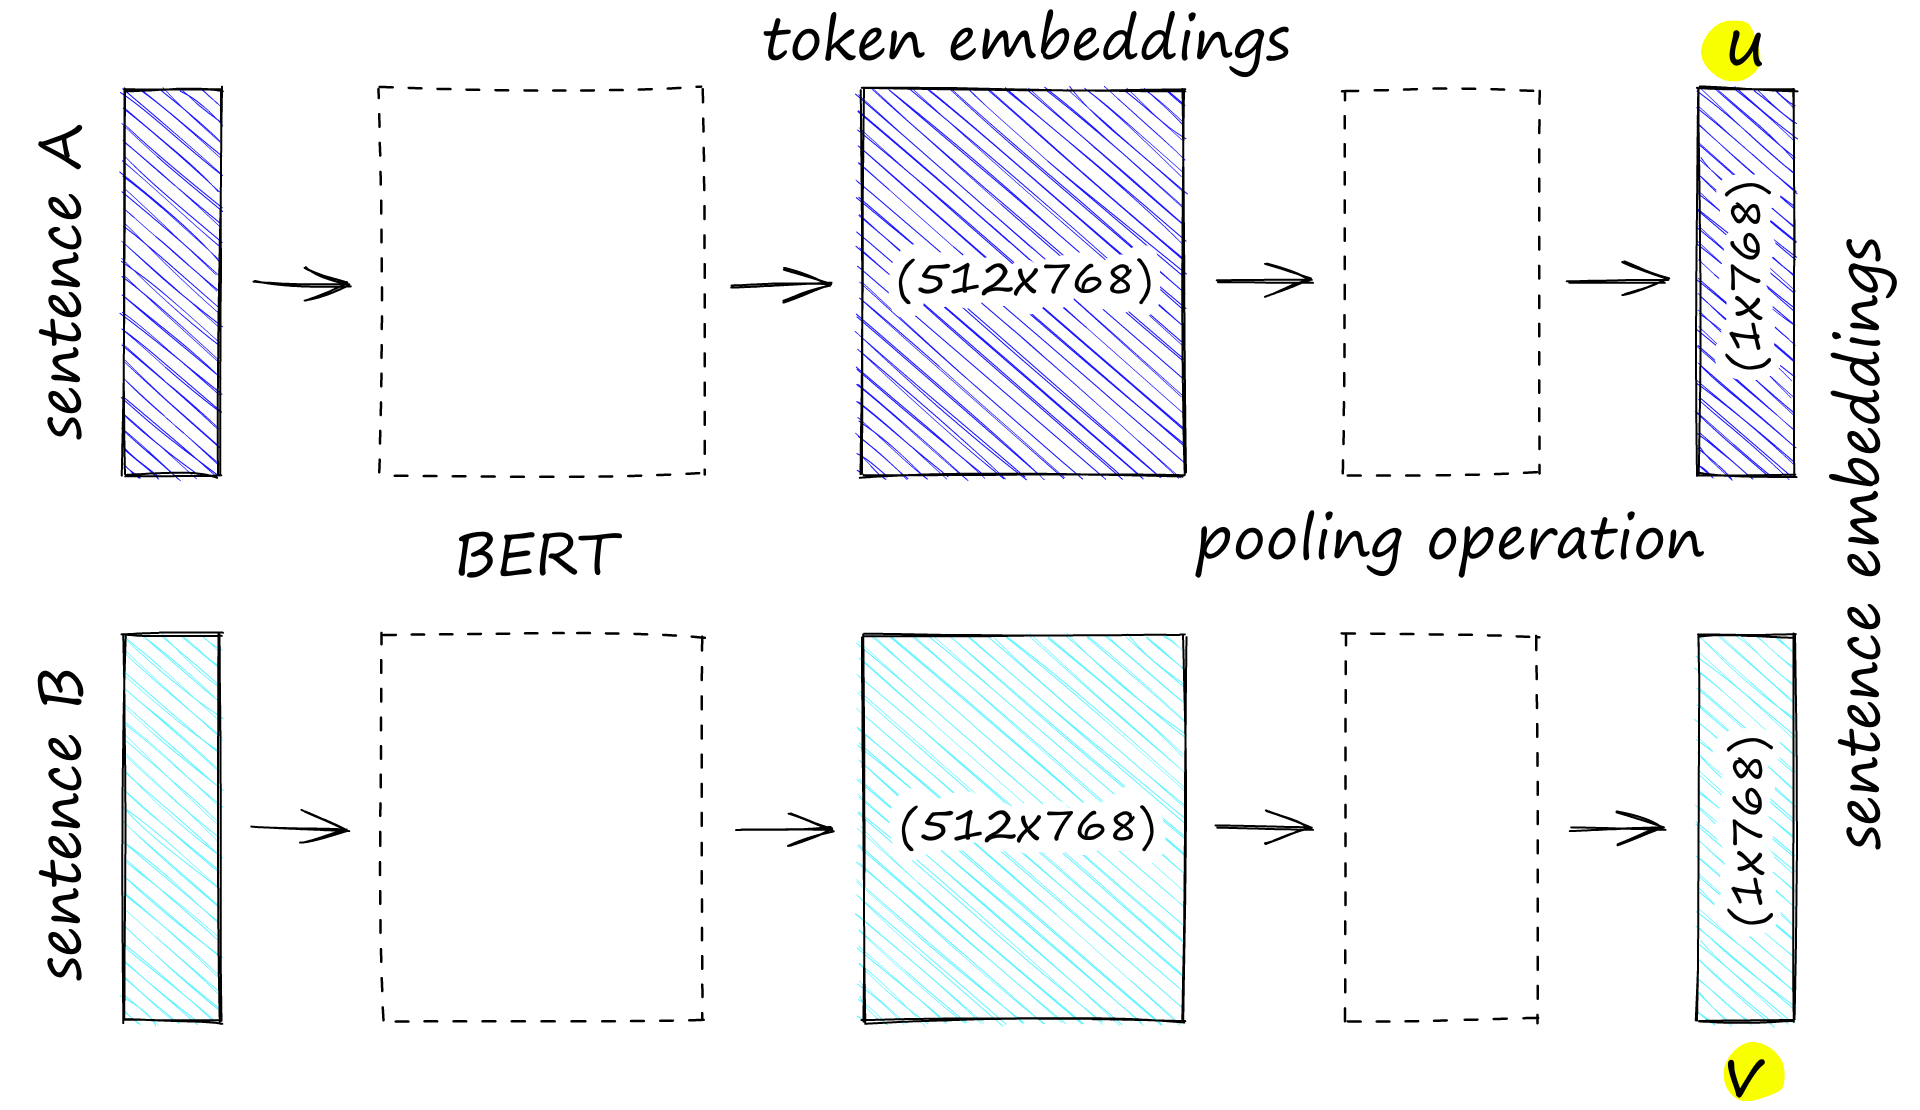 Siamese-BERT processing a sentence pair and then pooling the large token embeddings tensor into a single dense vector.